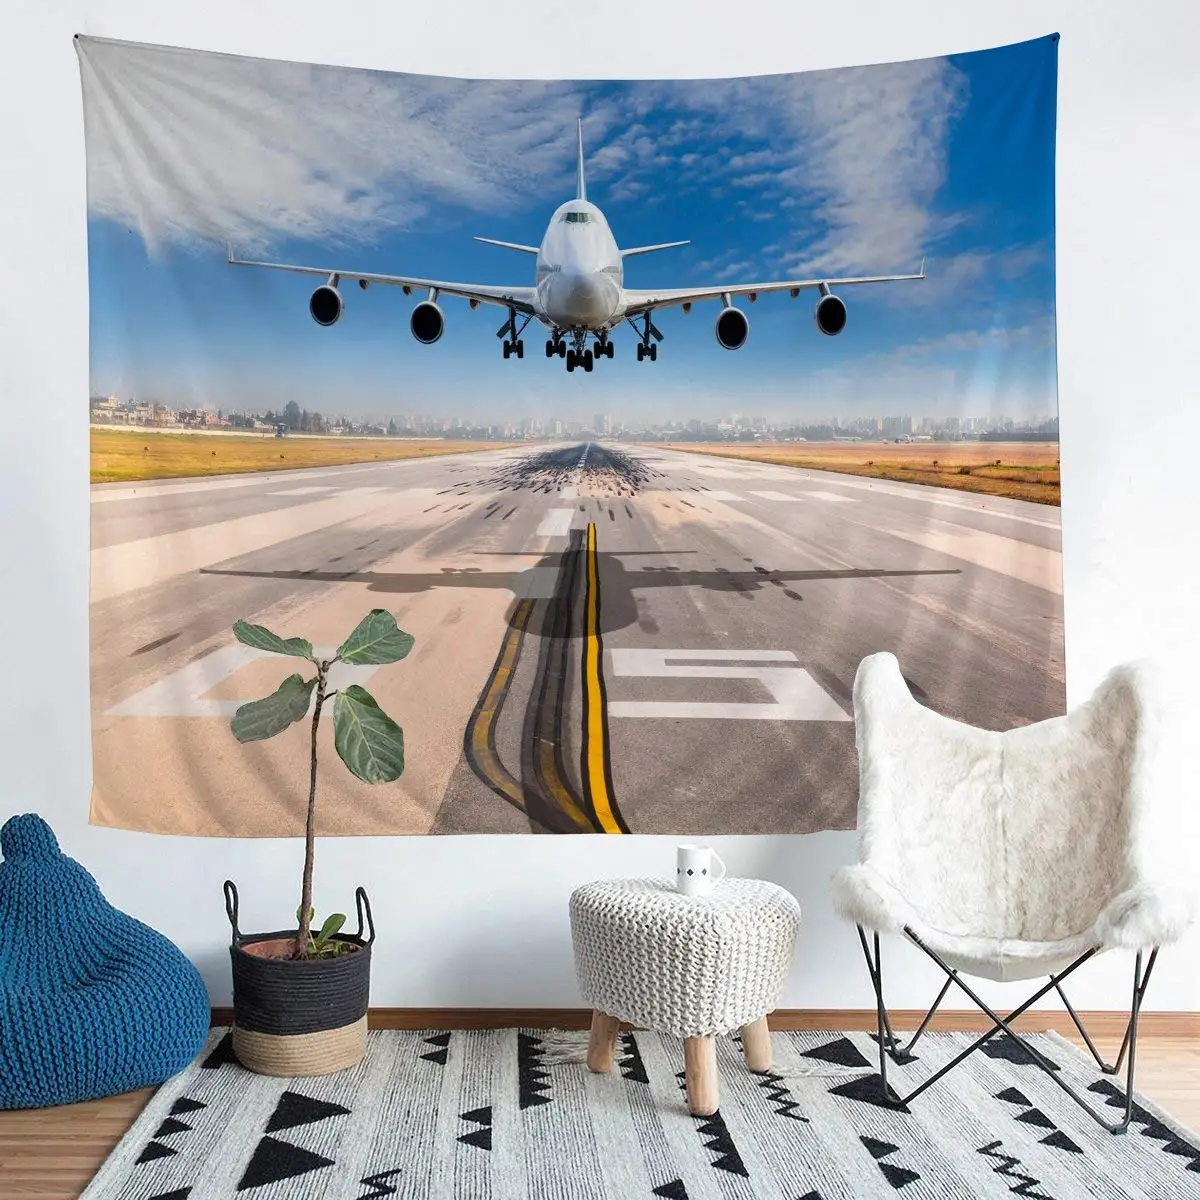 

Aircraft Tapestries Aircraft Runway Wall Hanging Sunset Aviation Theme Tapestry for Kids Boys Bedroom Decor Living Room Dorm